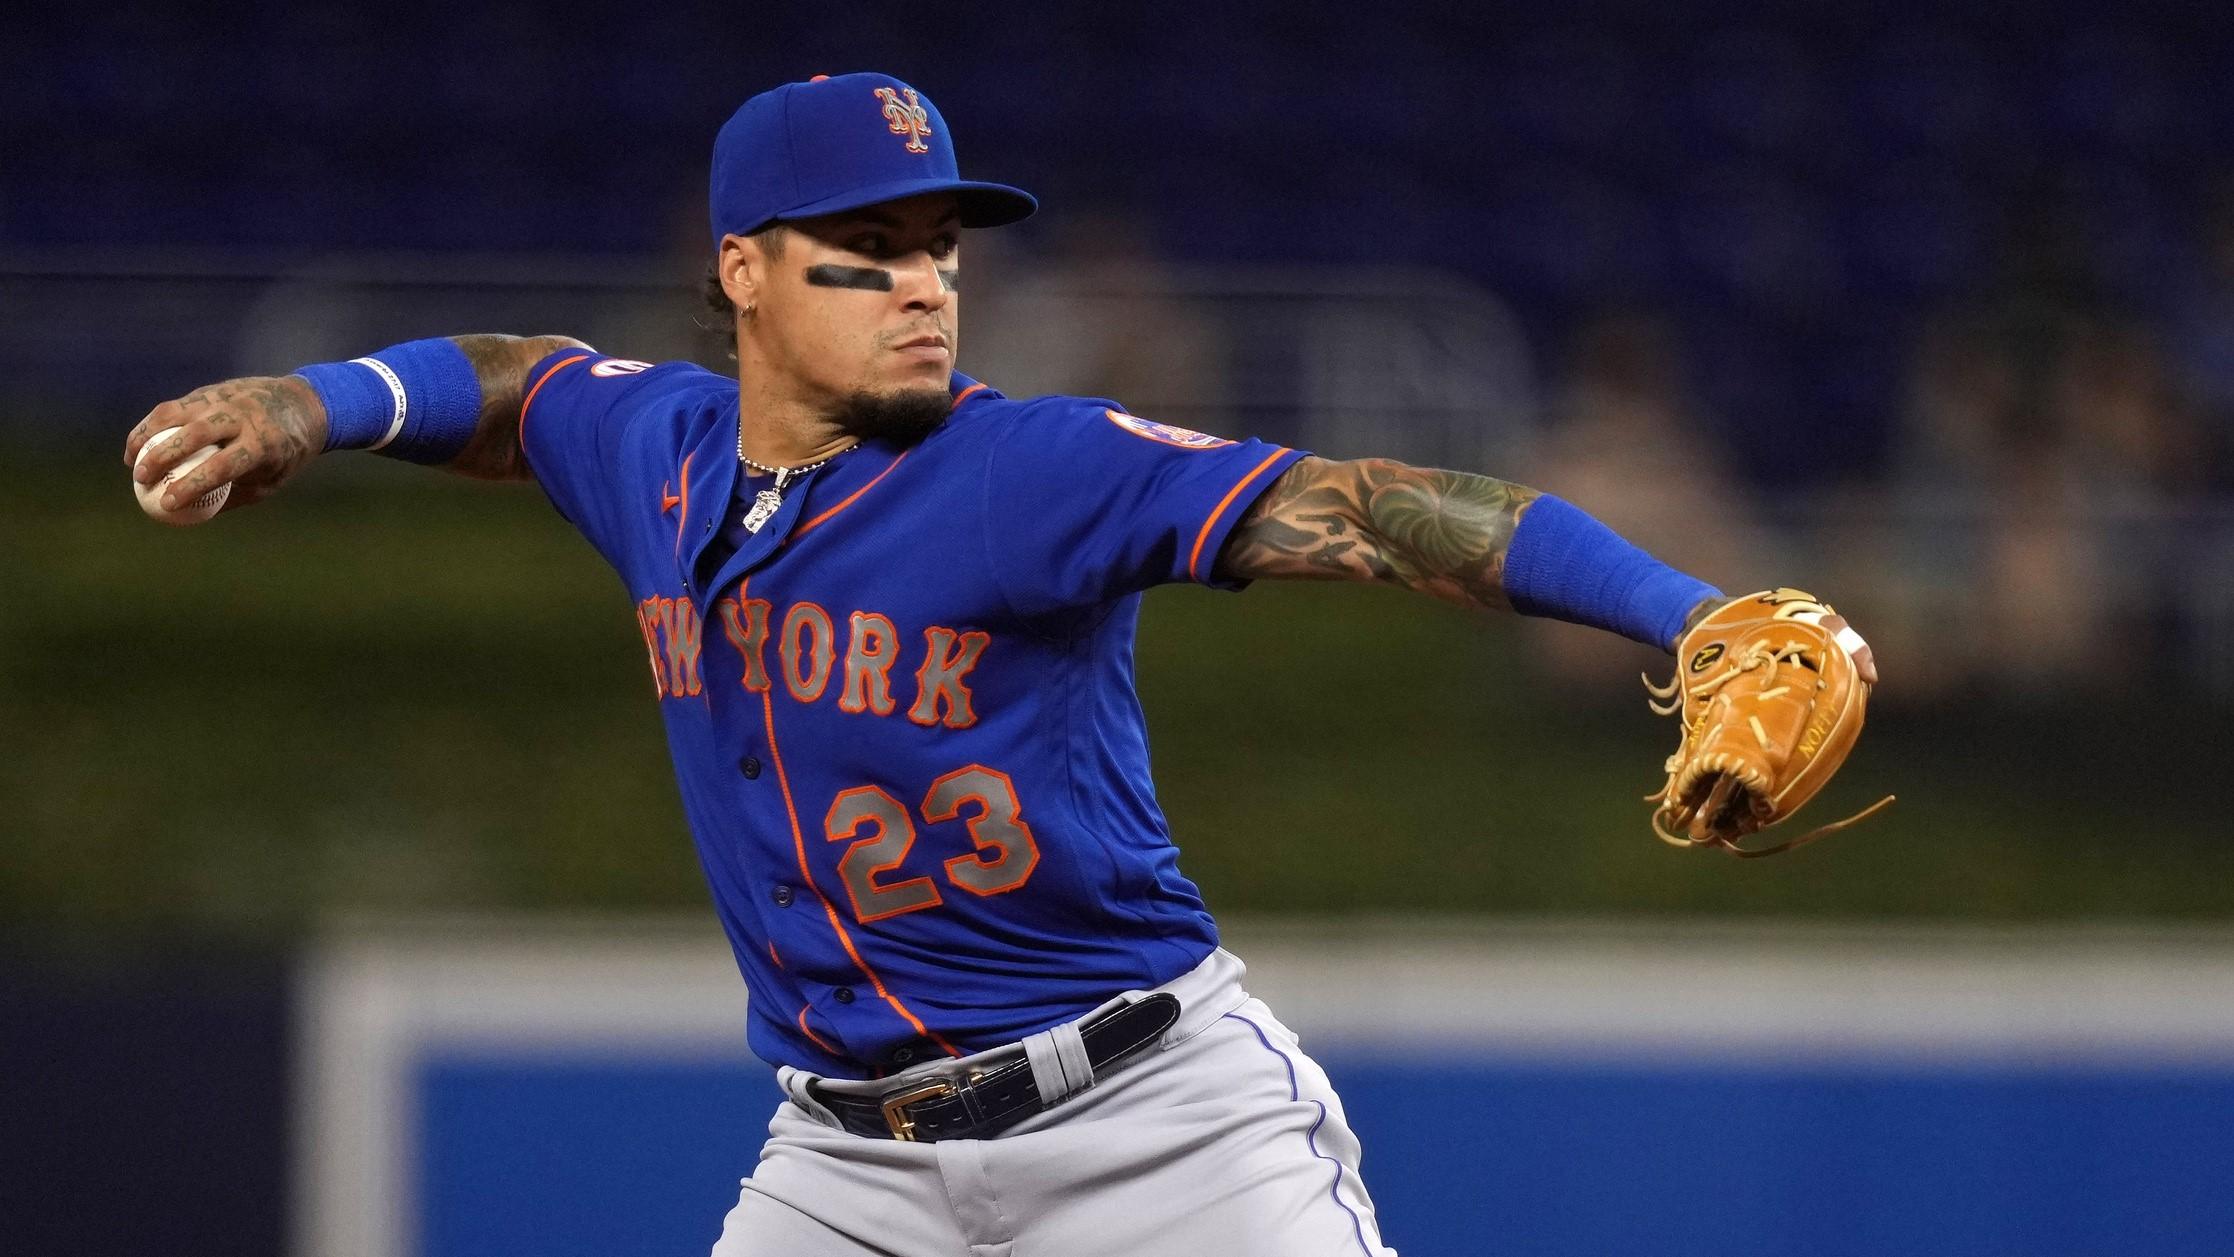 New York Mets shortstop Javier Baez (23) throws out Miami Marlins left fielder Jorge Alfaro (not pictured) in the 2nd inning at loanDepot park. / Jasen Vinlove-USA TODAY Sports